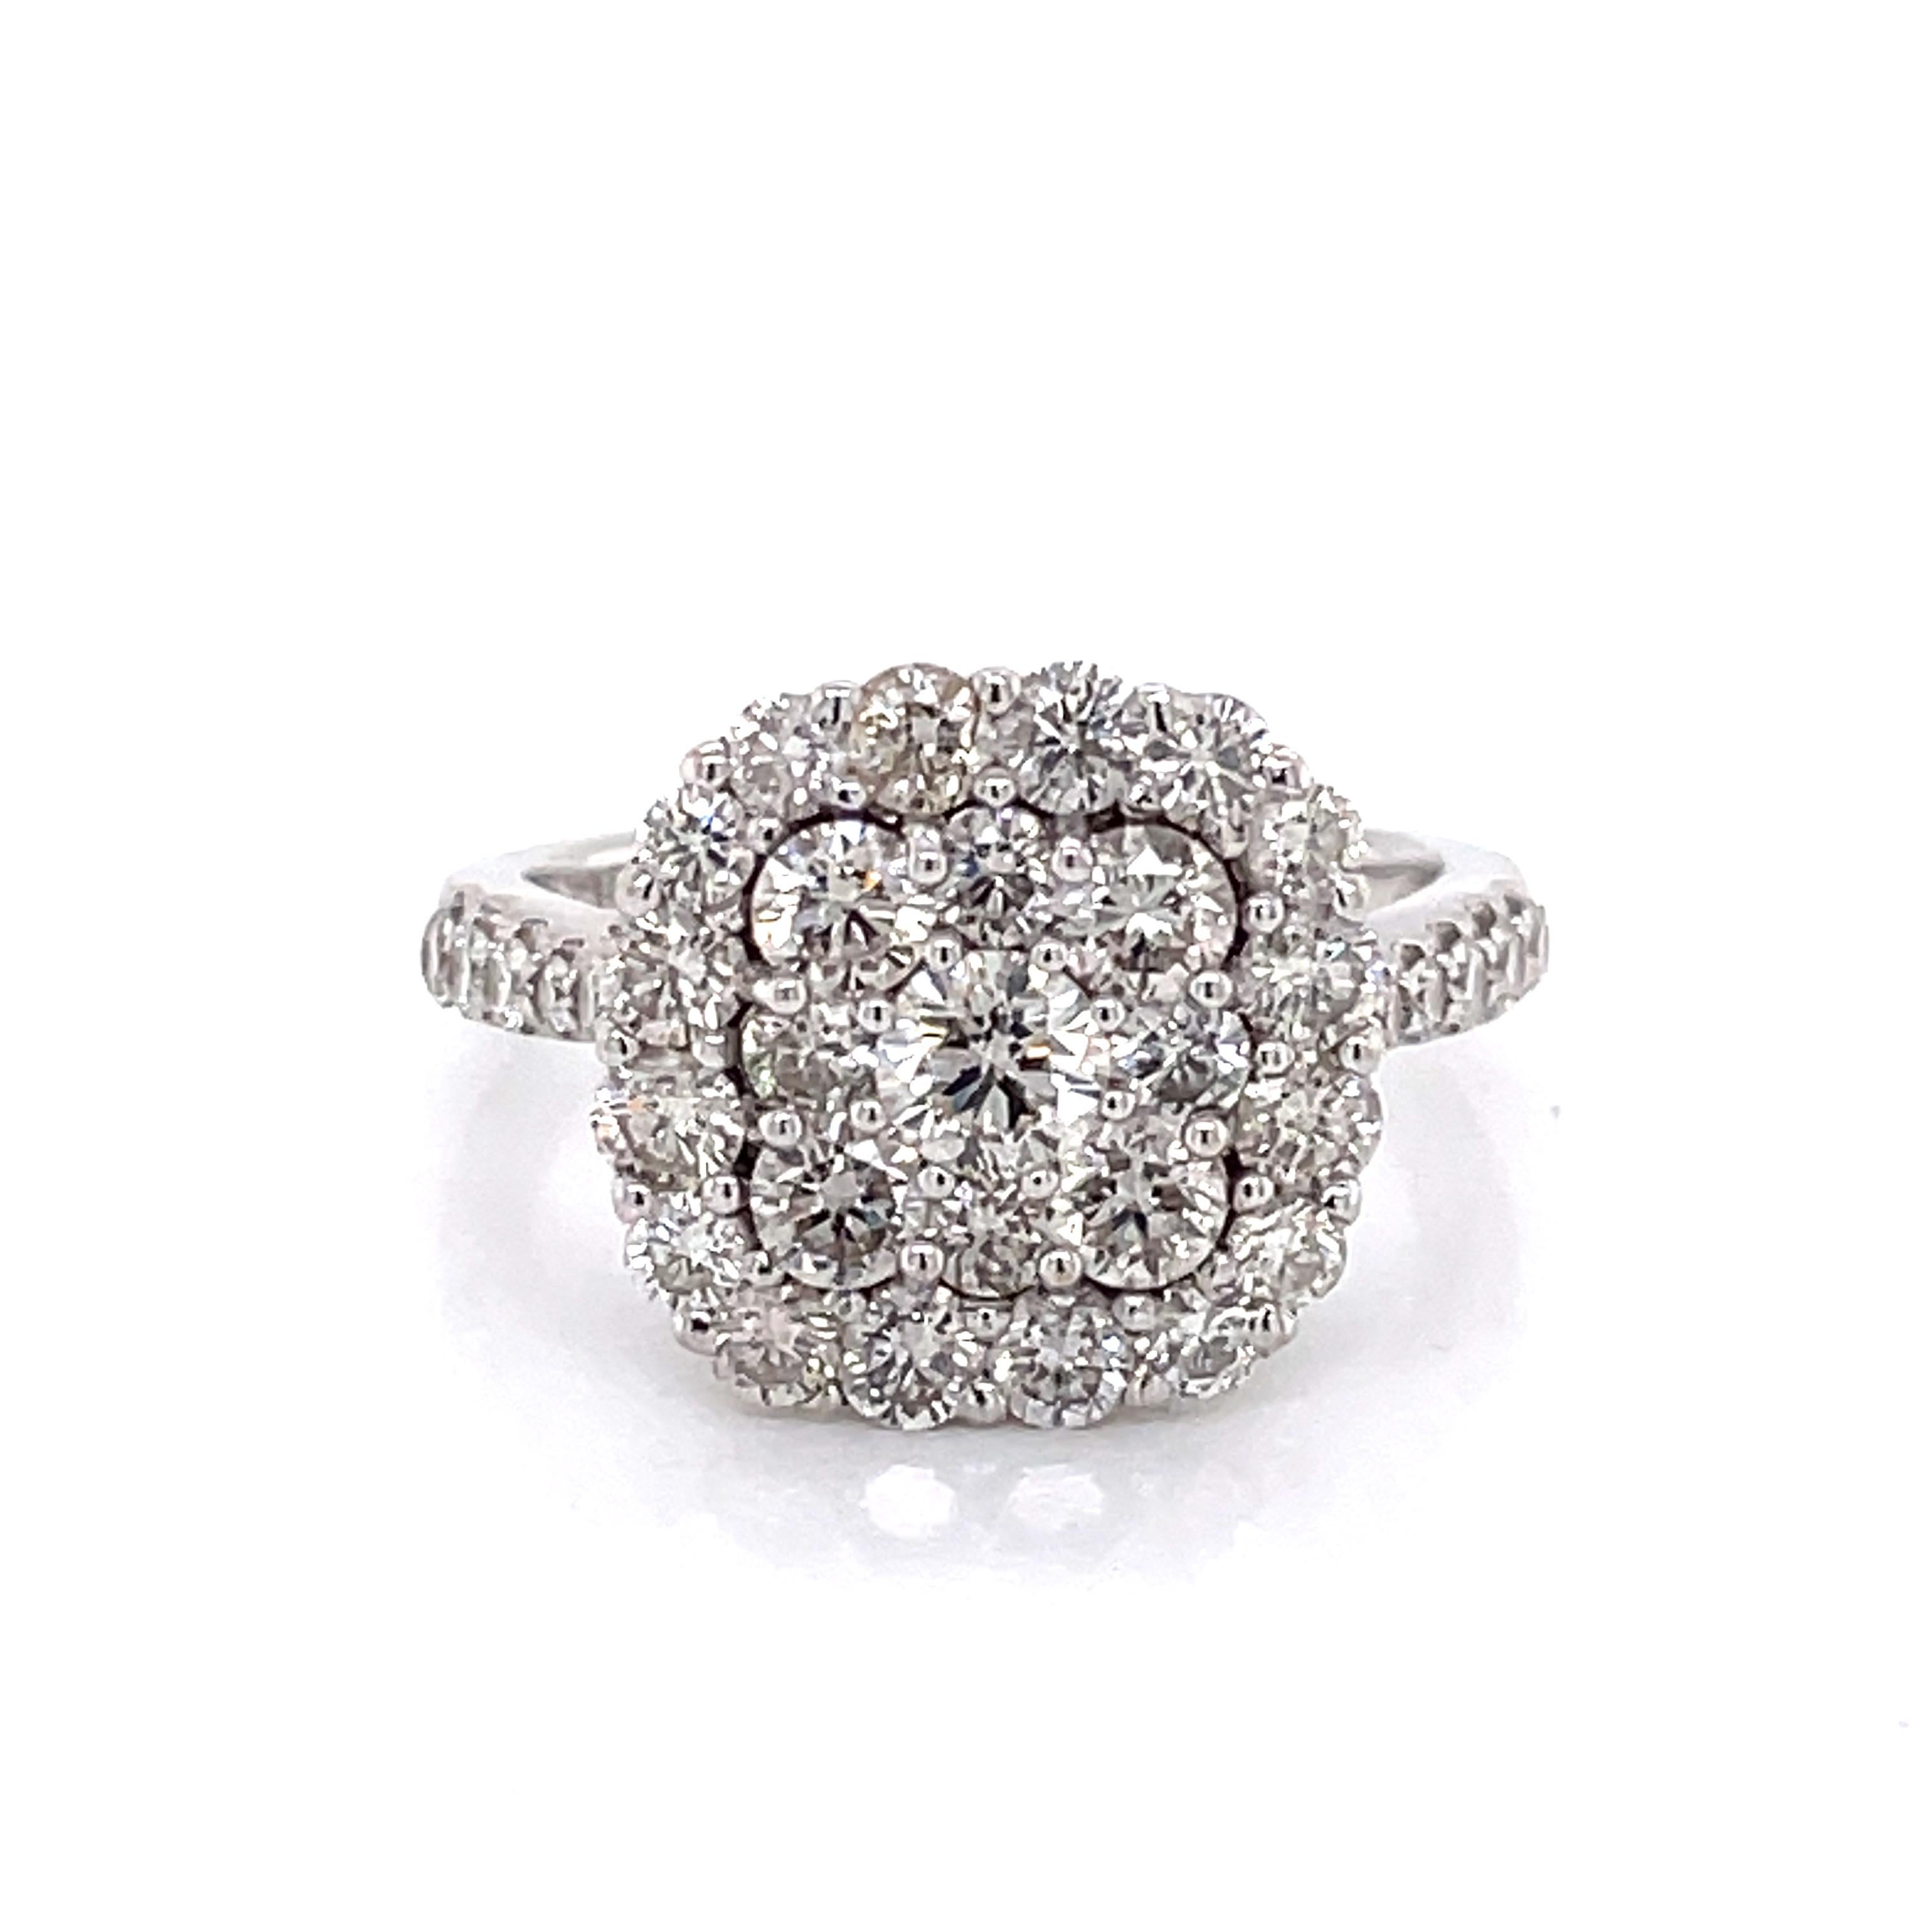 Twenty five round faceted H/VS diamonds, total weight 1.14 carats, create this flashy diamond cluster ring with halo. The square shaped ring head designed with soft corners and the clustered diamonds are individually prong set stones and create